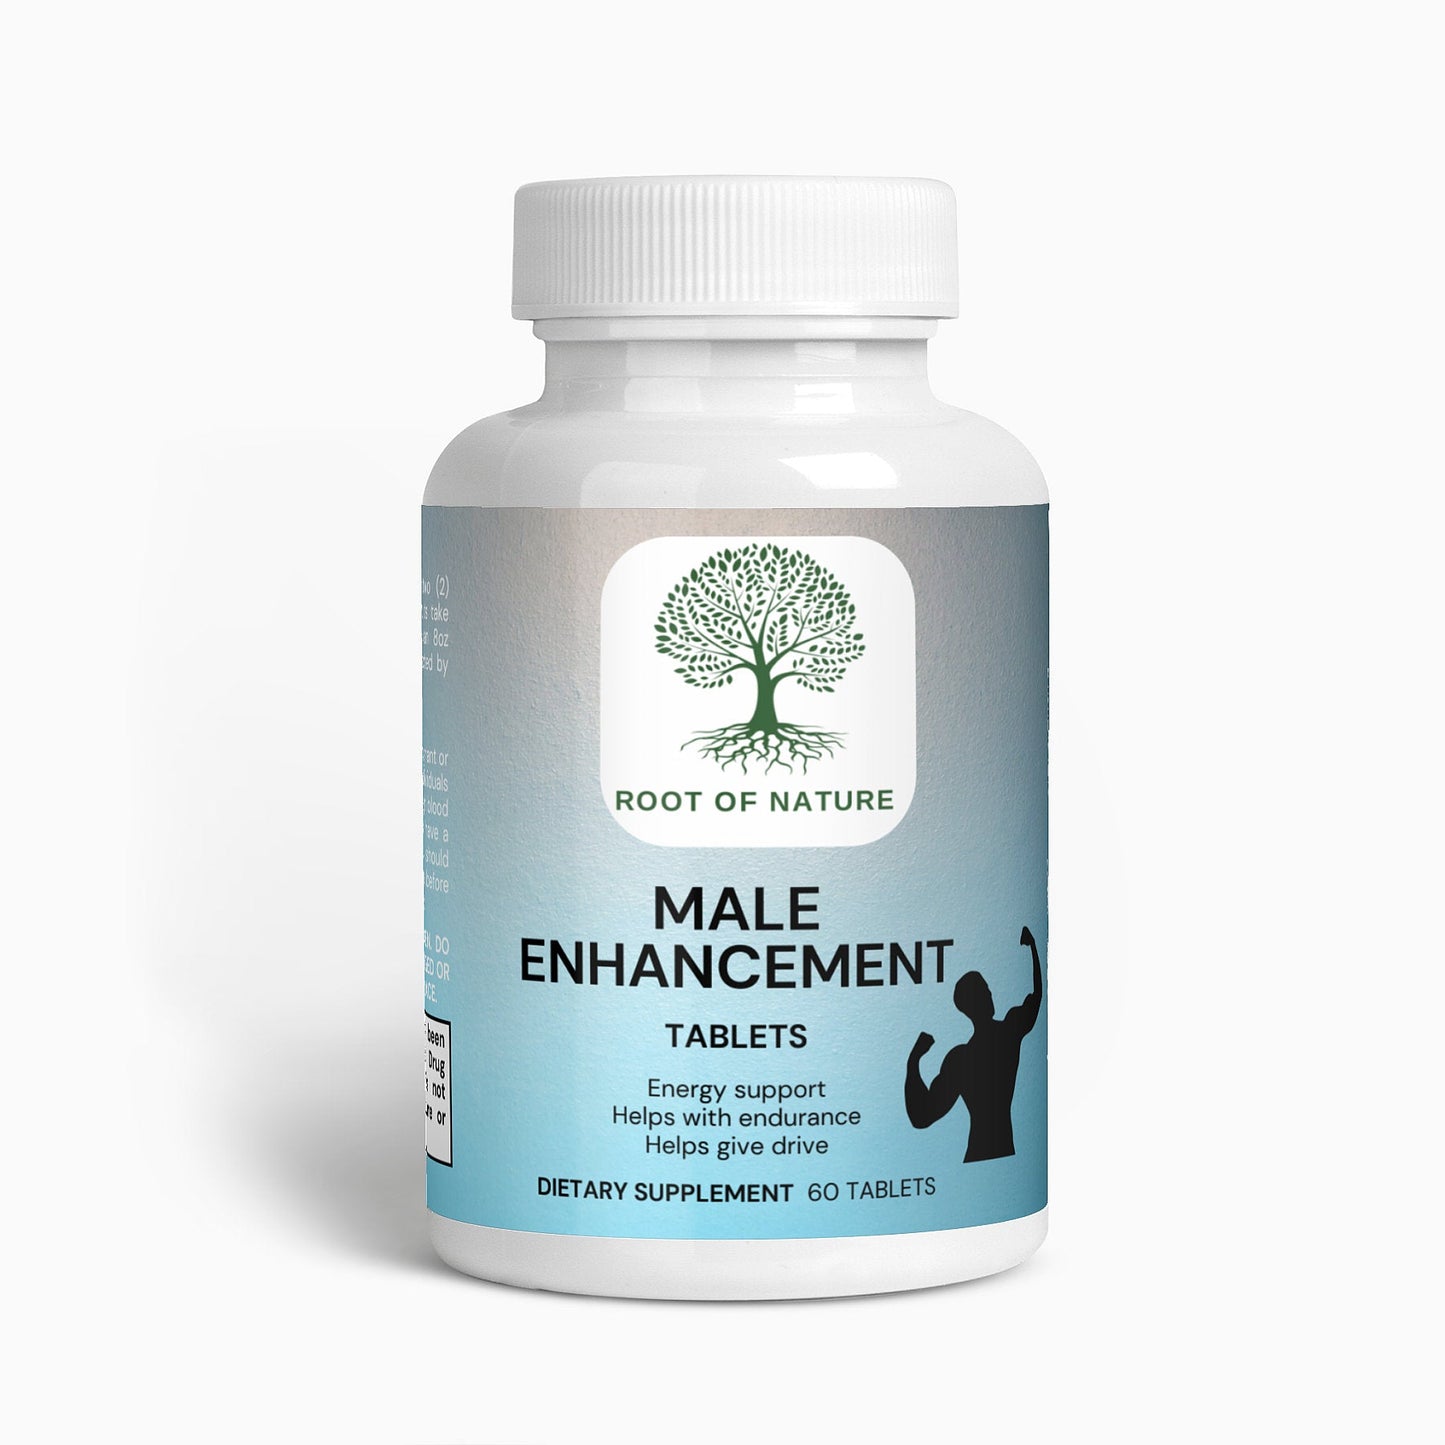 Horny Goat Weed Blend + Male Enhancement + Testosterone Booster